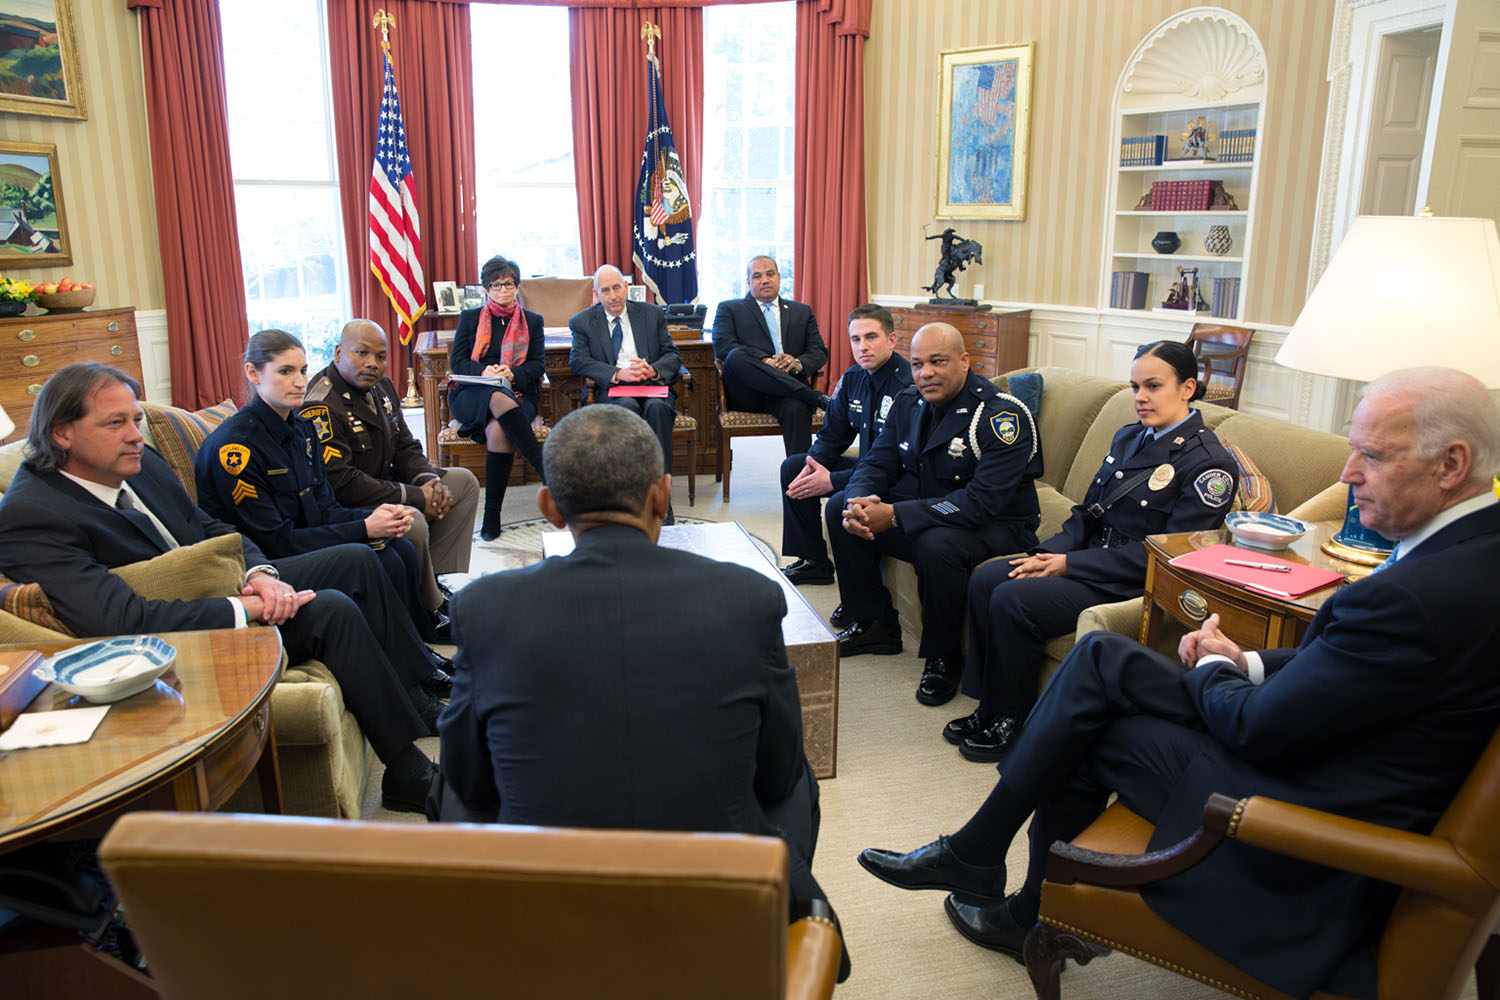 President Obama and Vice President Biden meet with rank-and-file law enforcement officials